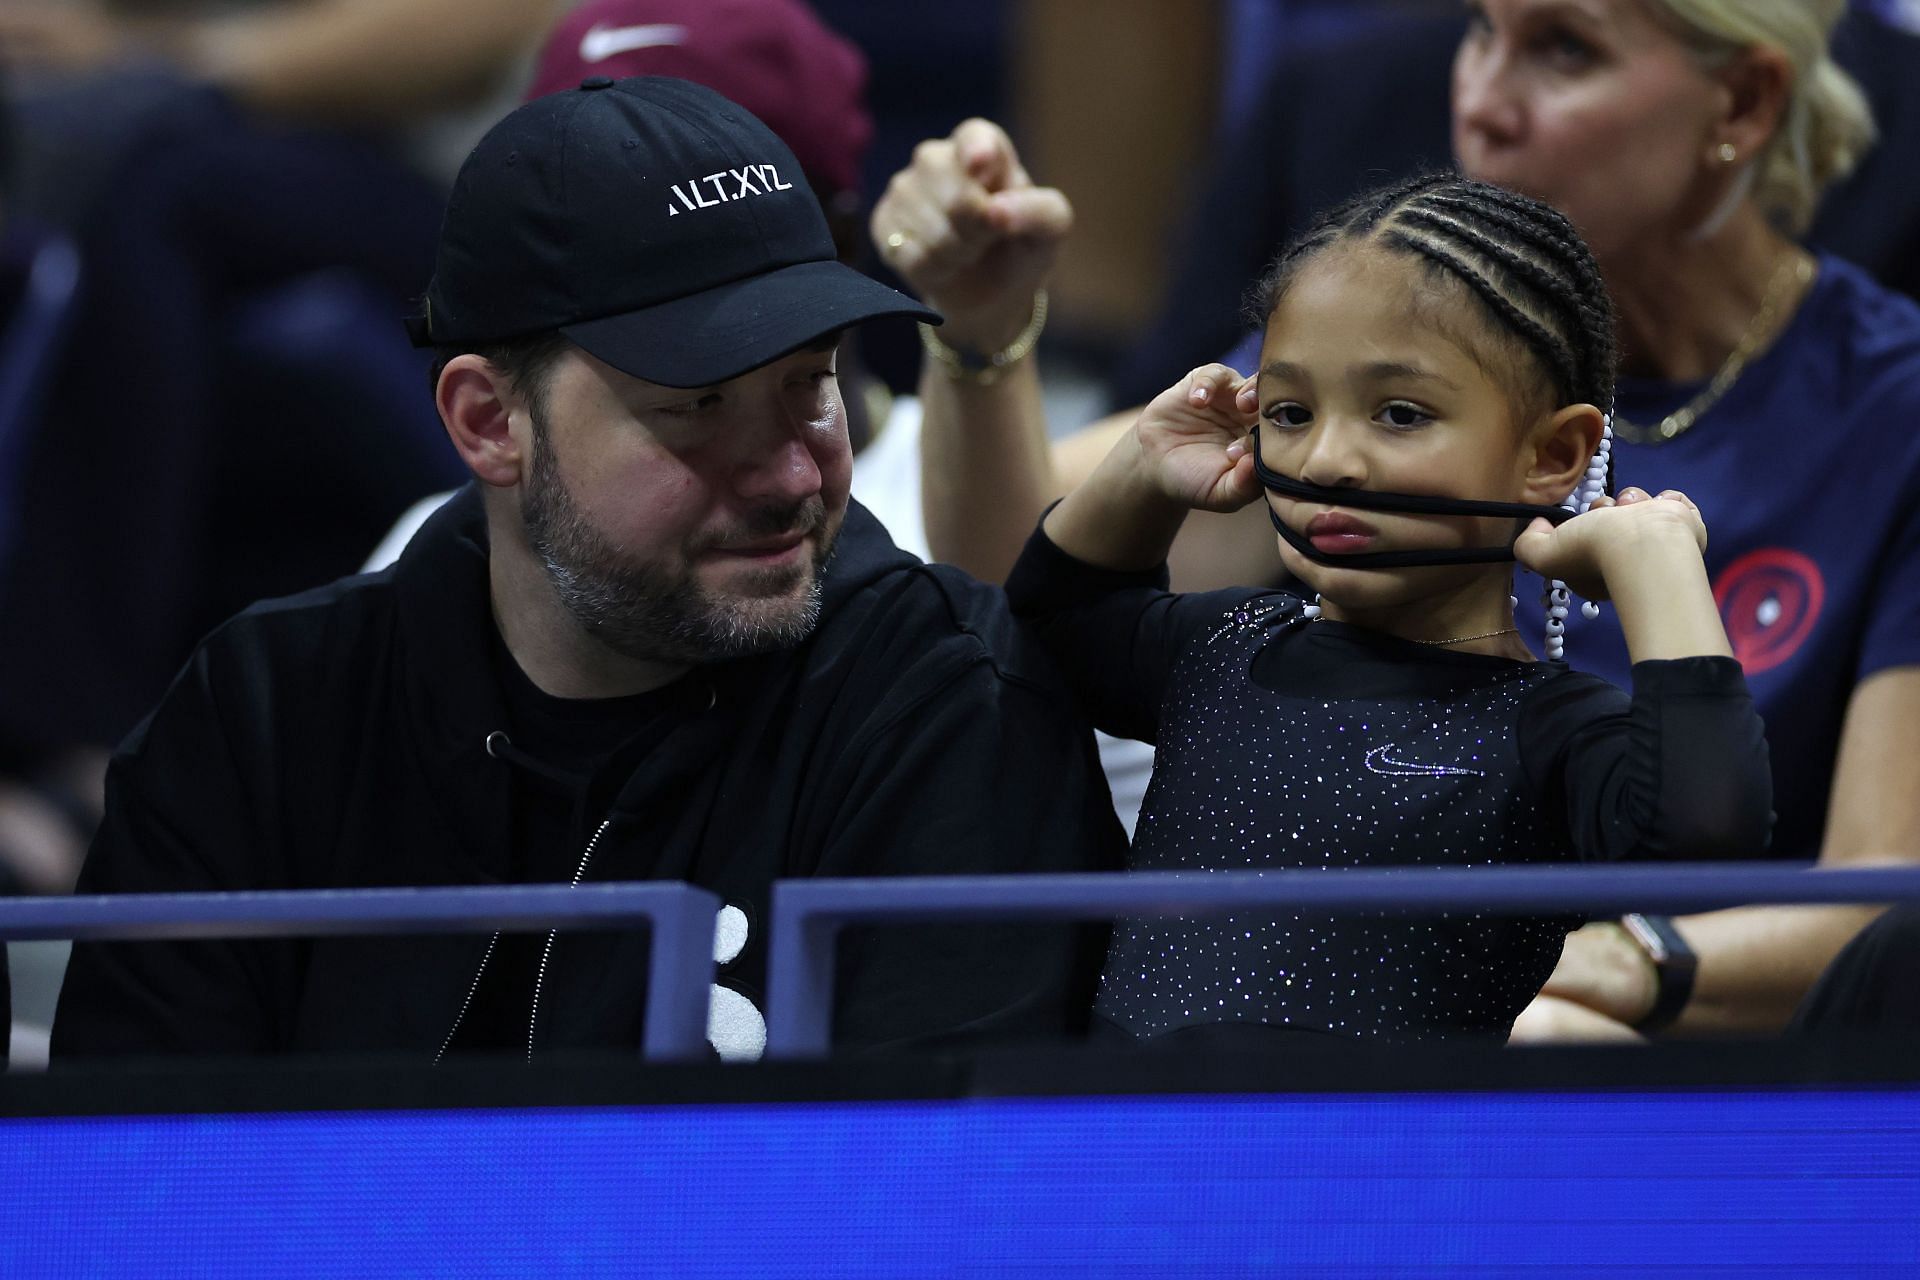 Alexis Ohanian with Olympia at the 2022 US Open